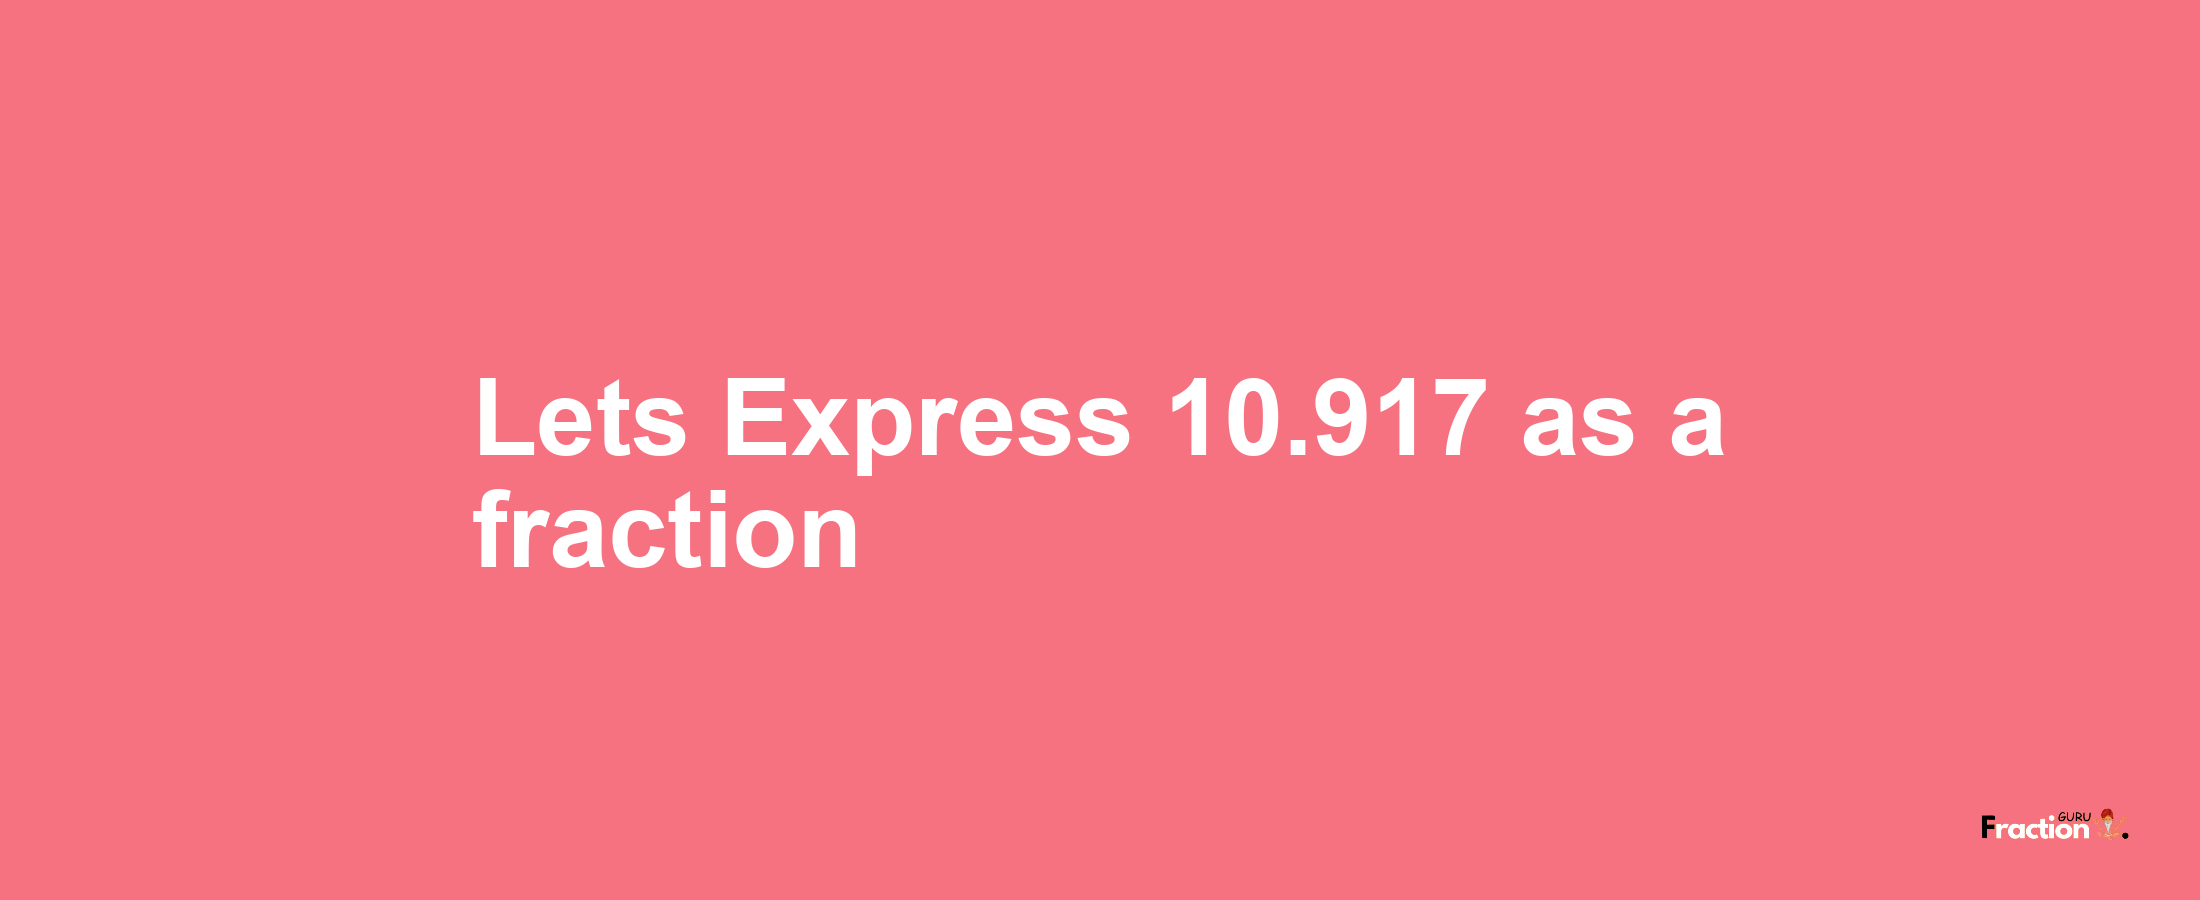 Lets Express 10.917 as afraction